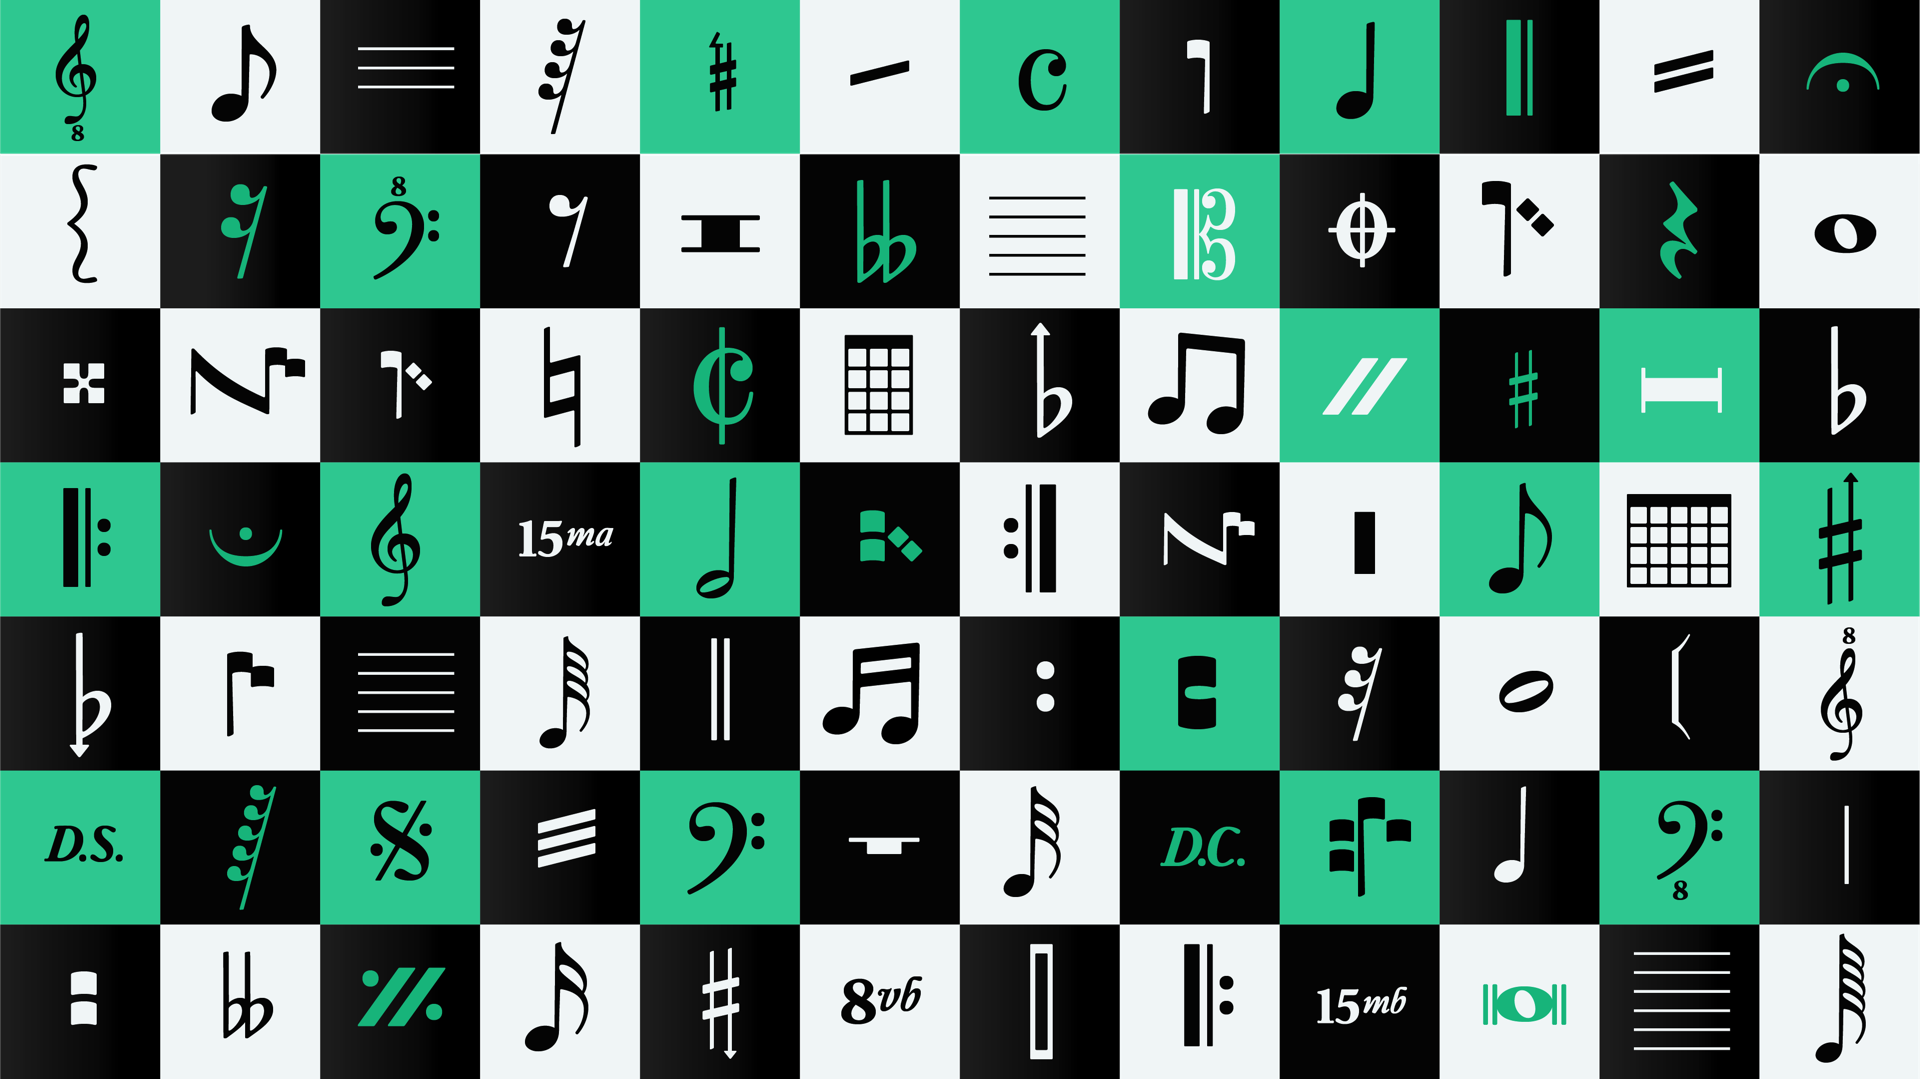 Background with black, aqua green and white squares. On the top layer are the musical symbols from the Symphony type family.